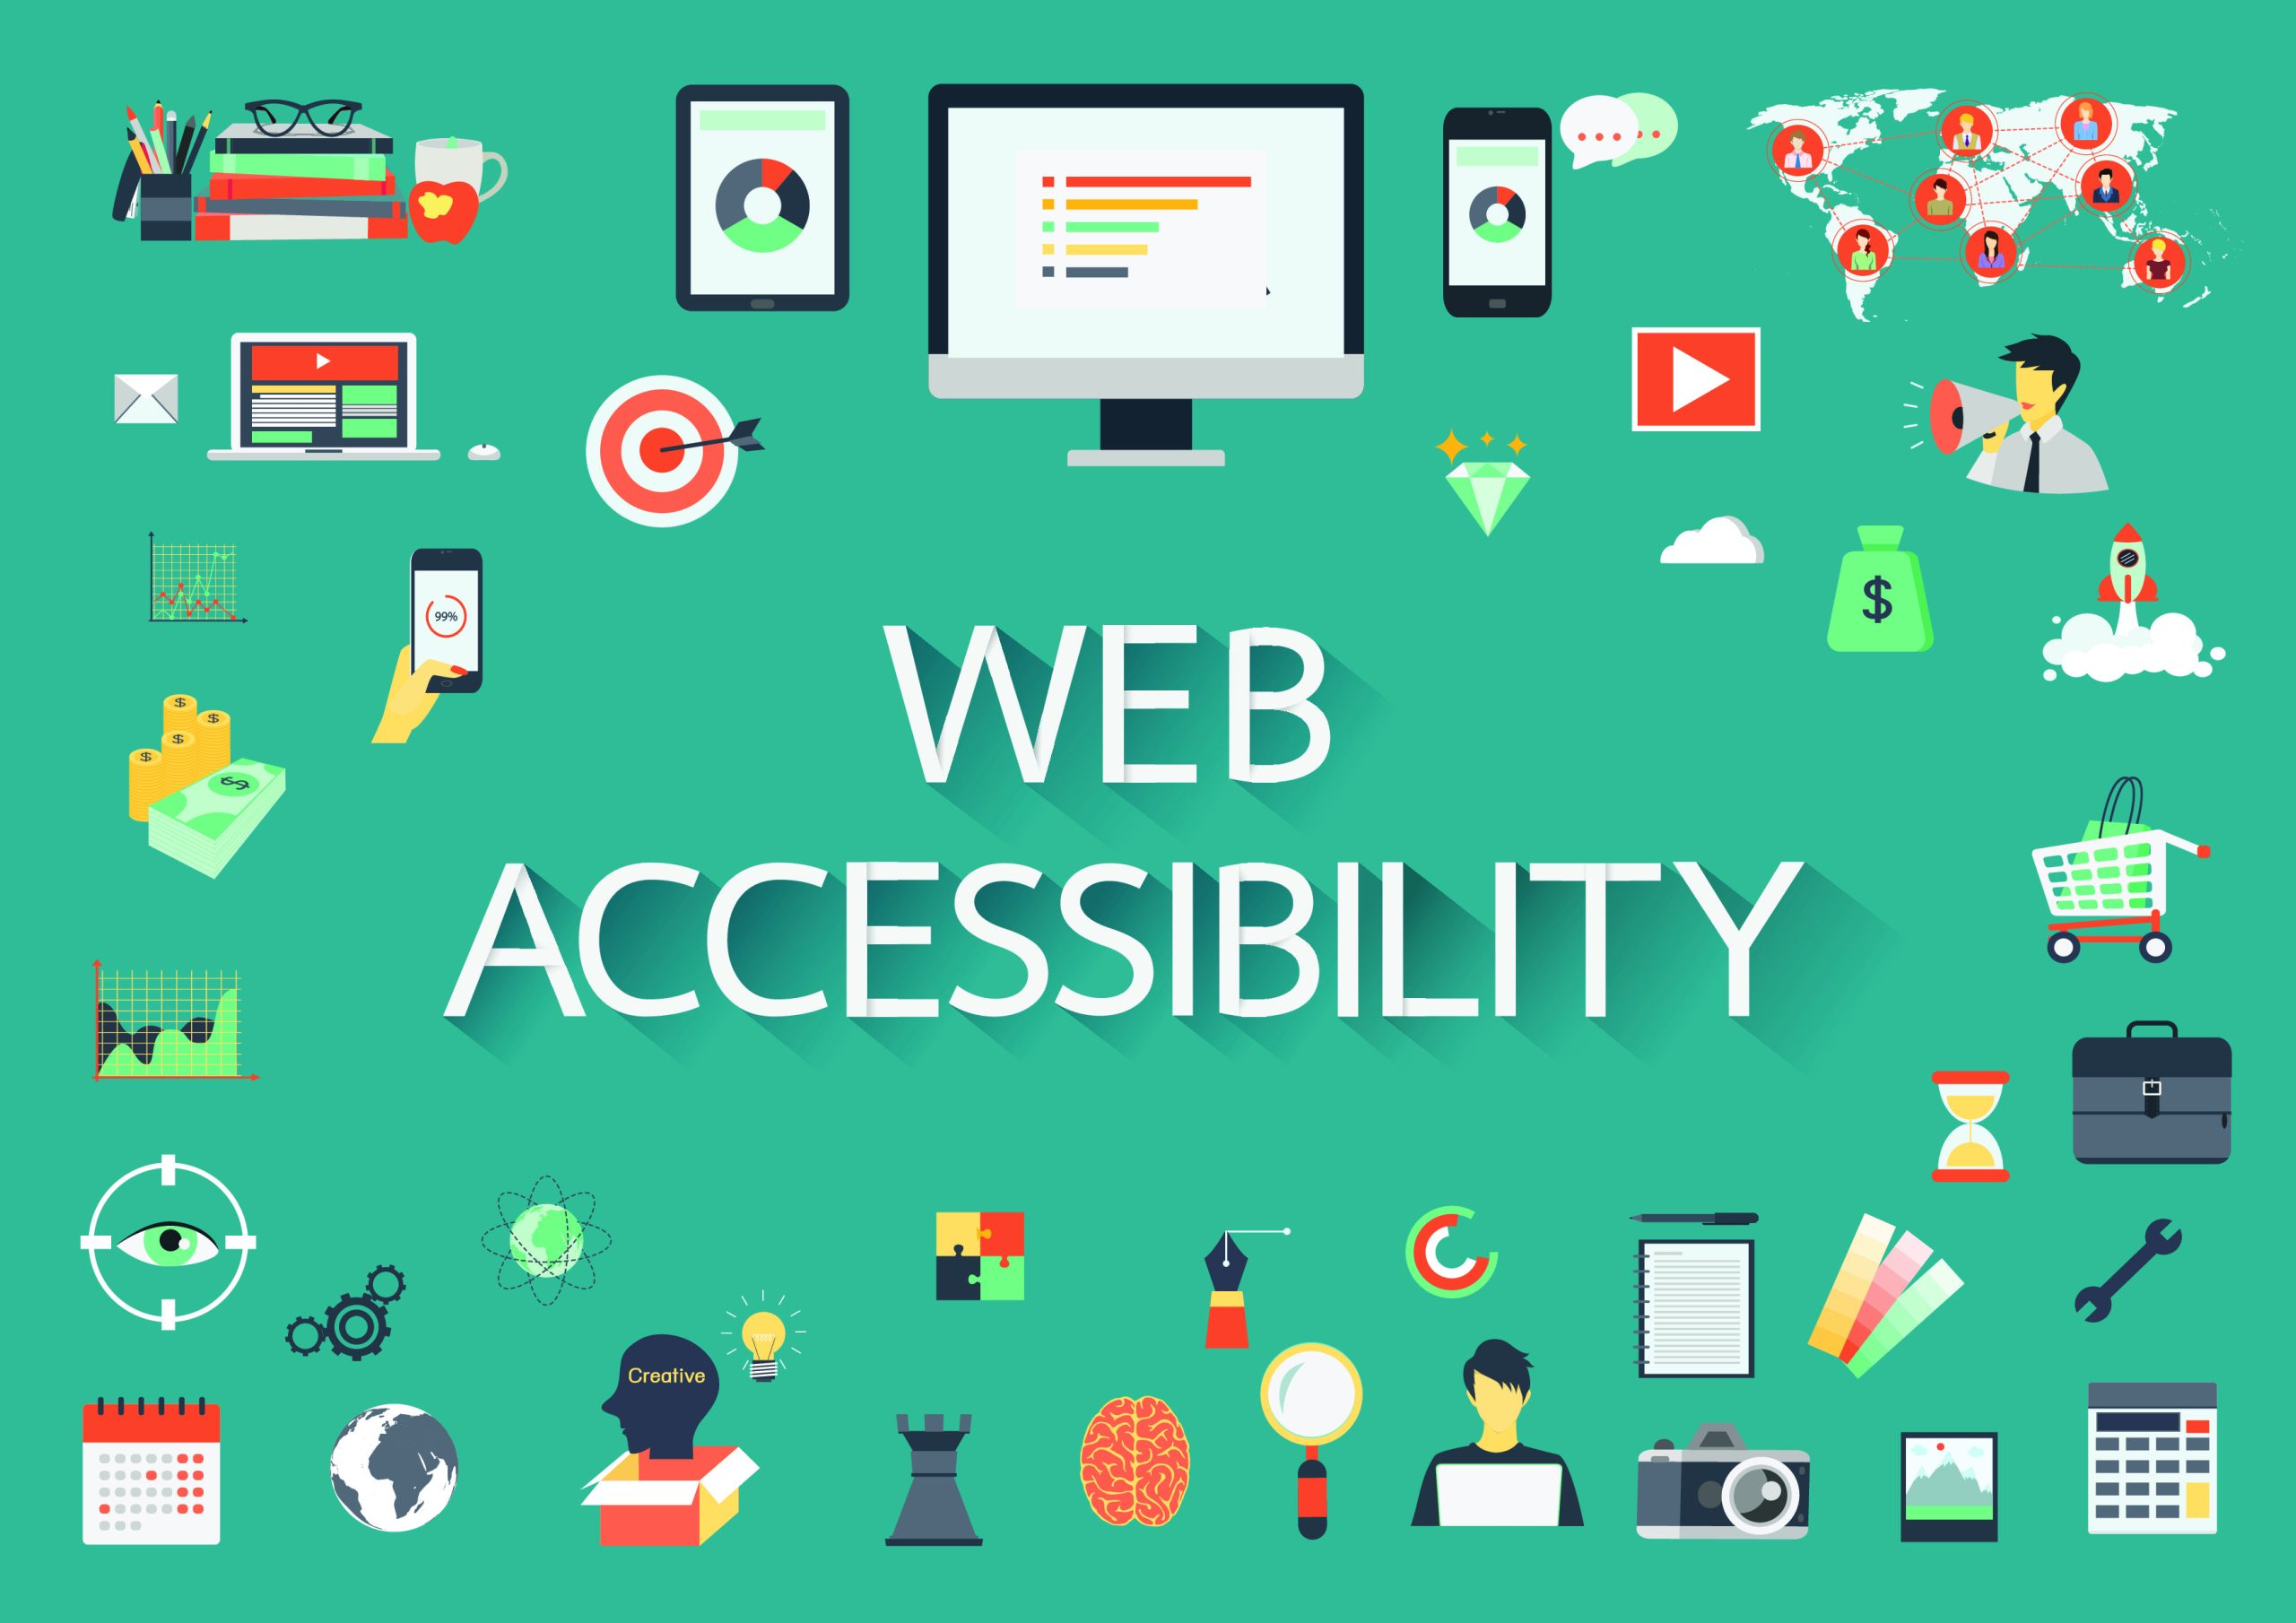 Web Accessibility – What Is It & Why It Matters in the Digital World?